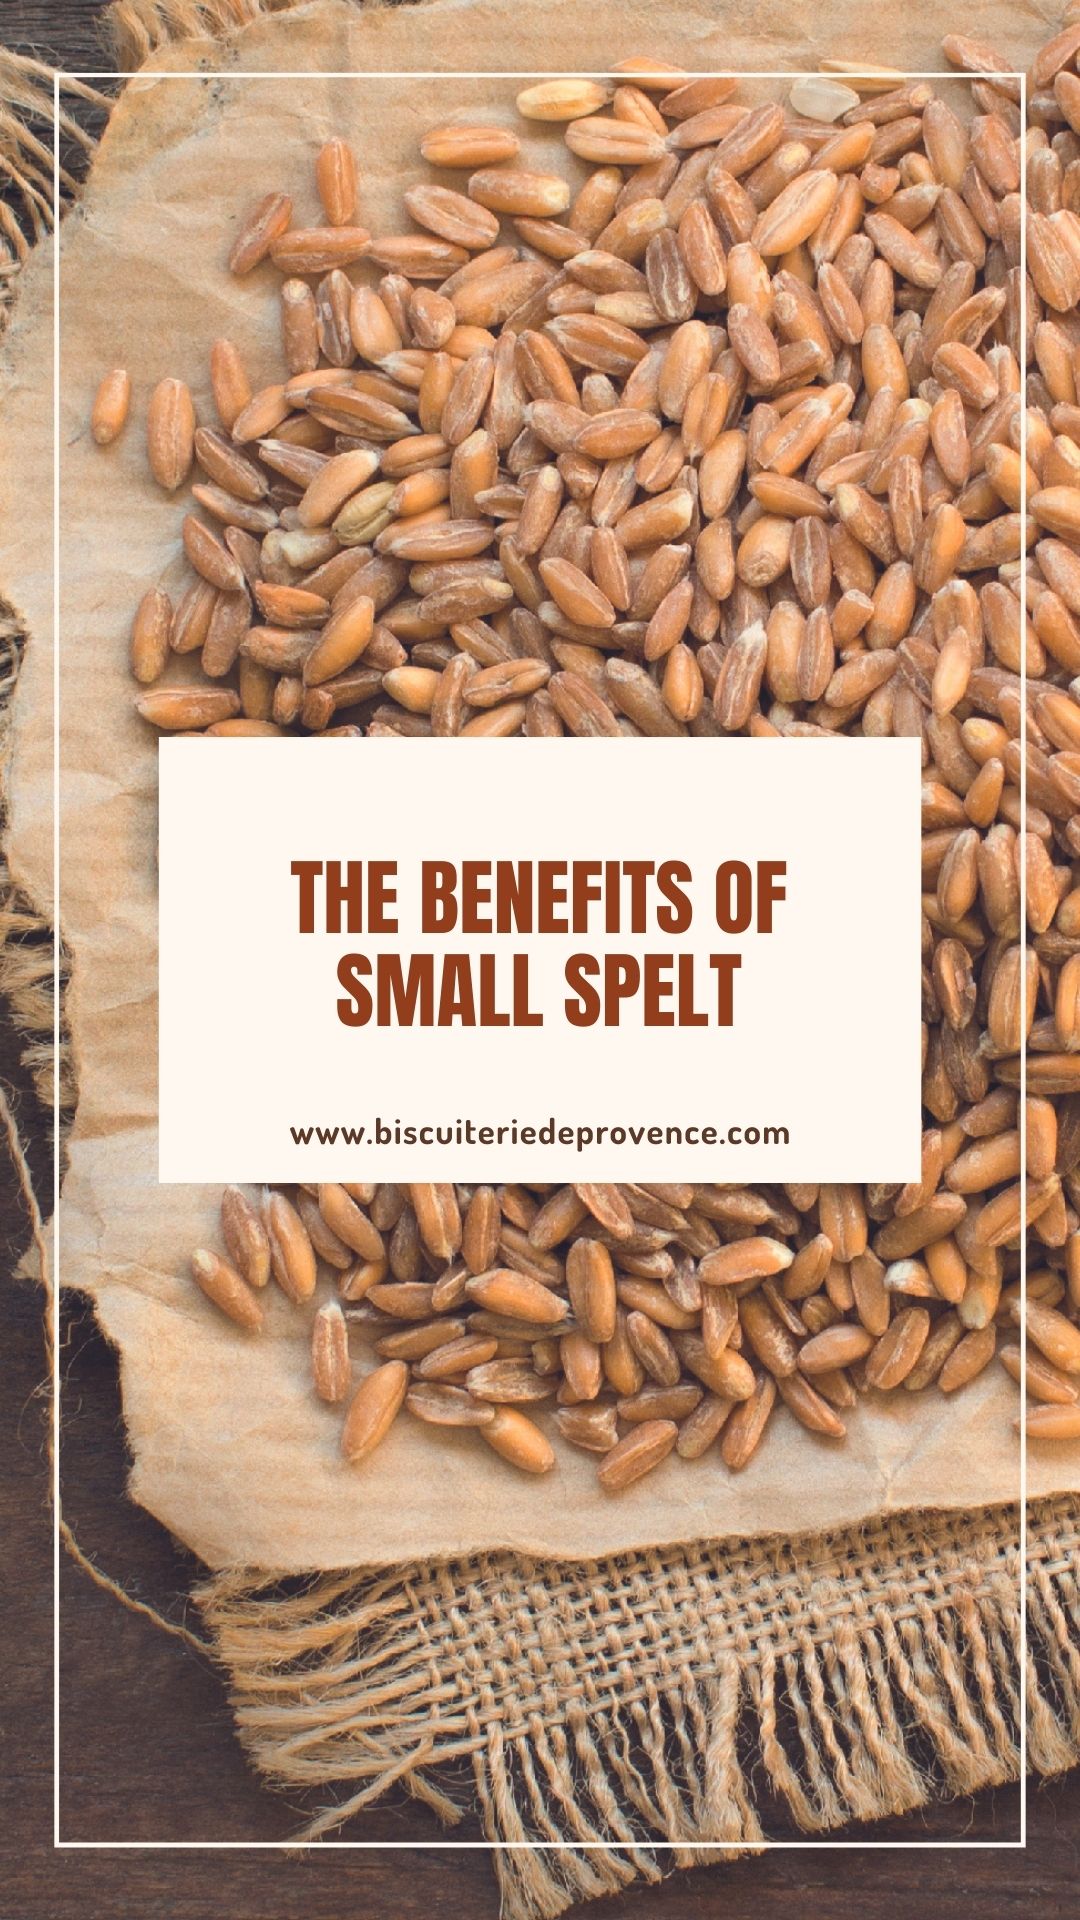 The benefits of small spelt